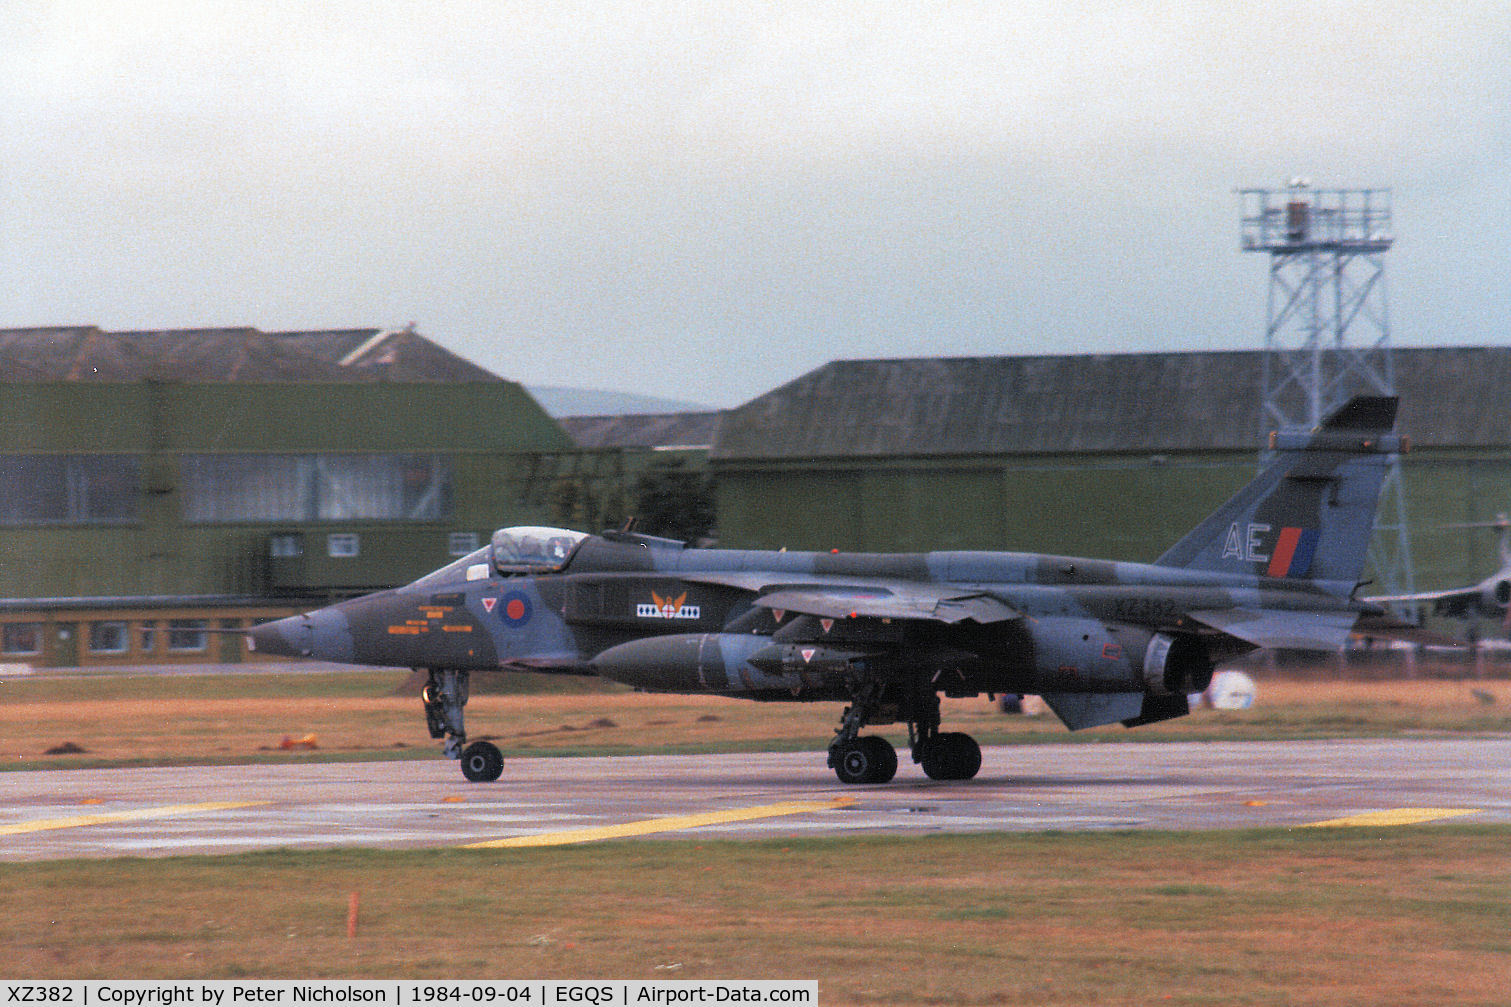 XZ382, 1977 Sepecat Jaguar GR.1 C/N S.147, Jaguar GR.1 of 14 Squadron at RAF Bruggen leaving the active runway for the Visiting Aircraft Section at RAF Lossiemouth in September 1984.